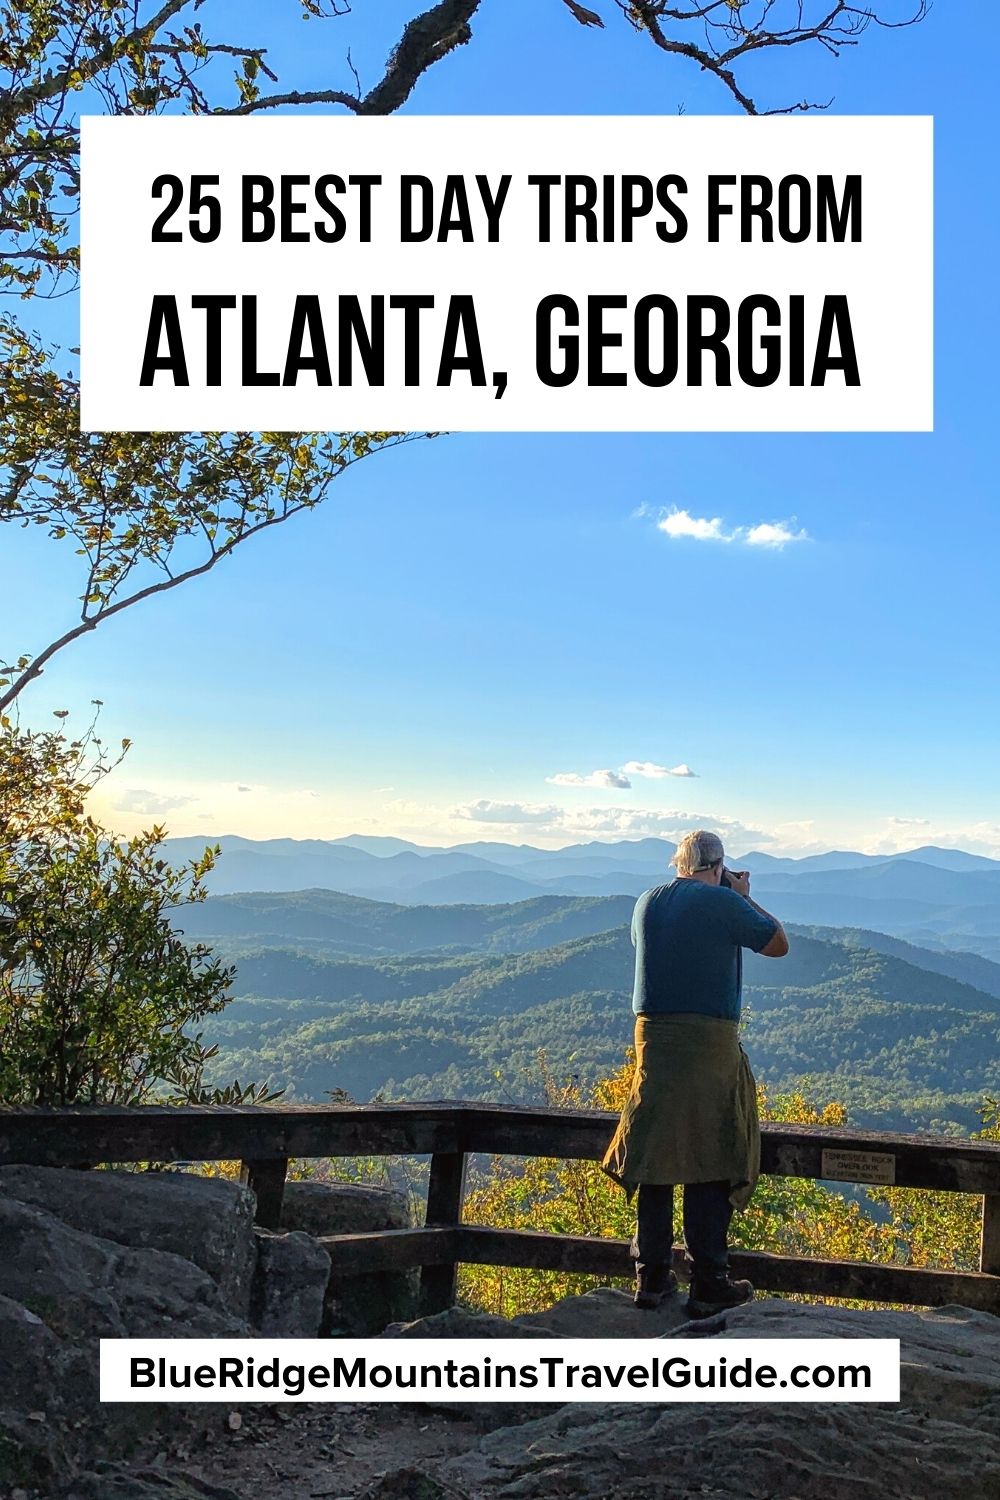 The 25 Best Day Trips From Atlanta, including Georgia state parks, hiking trails, wineries, waterfalls, mountain towns and more. | atlanta day trips | road trips from atlanta | day trips in georgia | road trips from atlanta | day trips atlanta | georgia day trips | things to do outside in atlanta | places to visit near atlanta | things to do outside atlanta | best weekend trips from atlanta